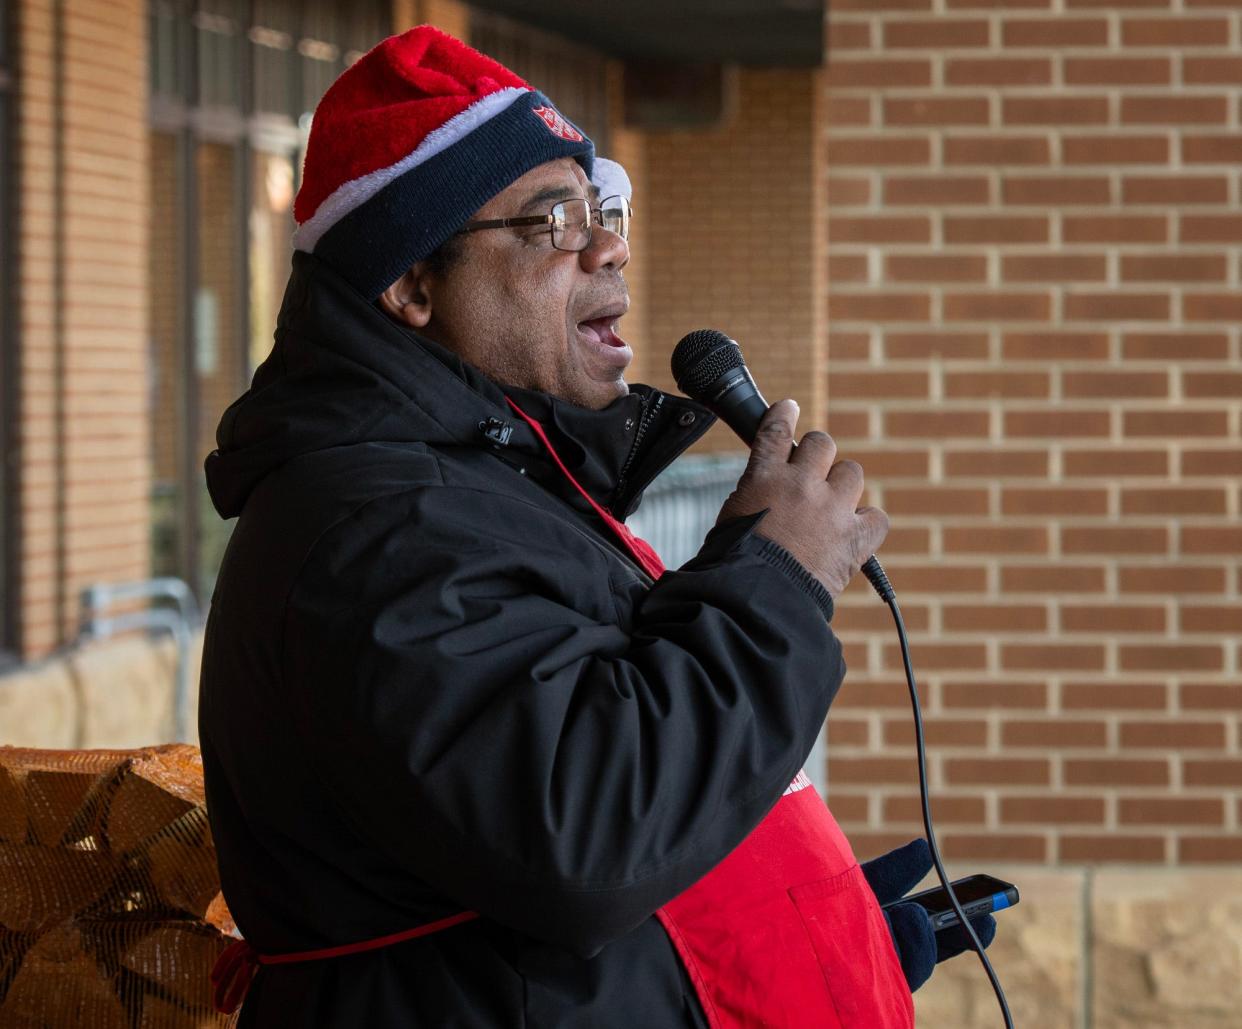 Salvation Army bell ringer Keith Bryant Sr. sings songs outside Roche Bros. Supermarket Friday in Westborough.